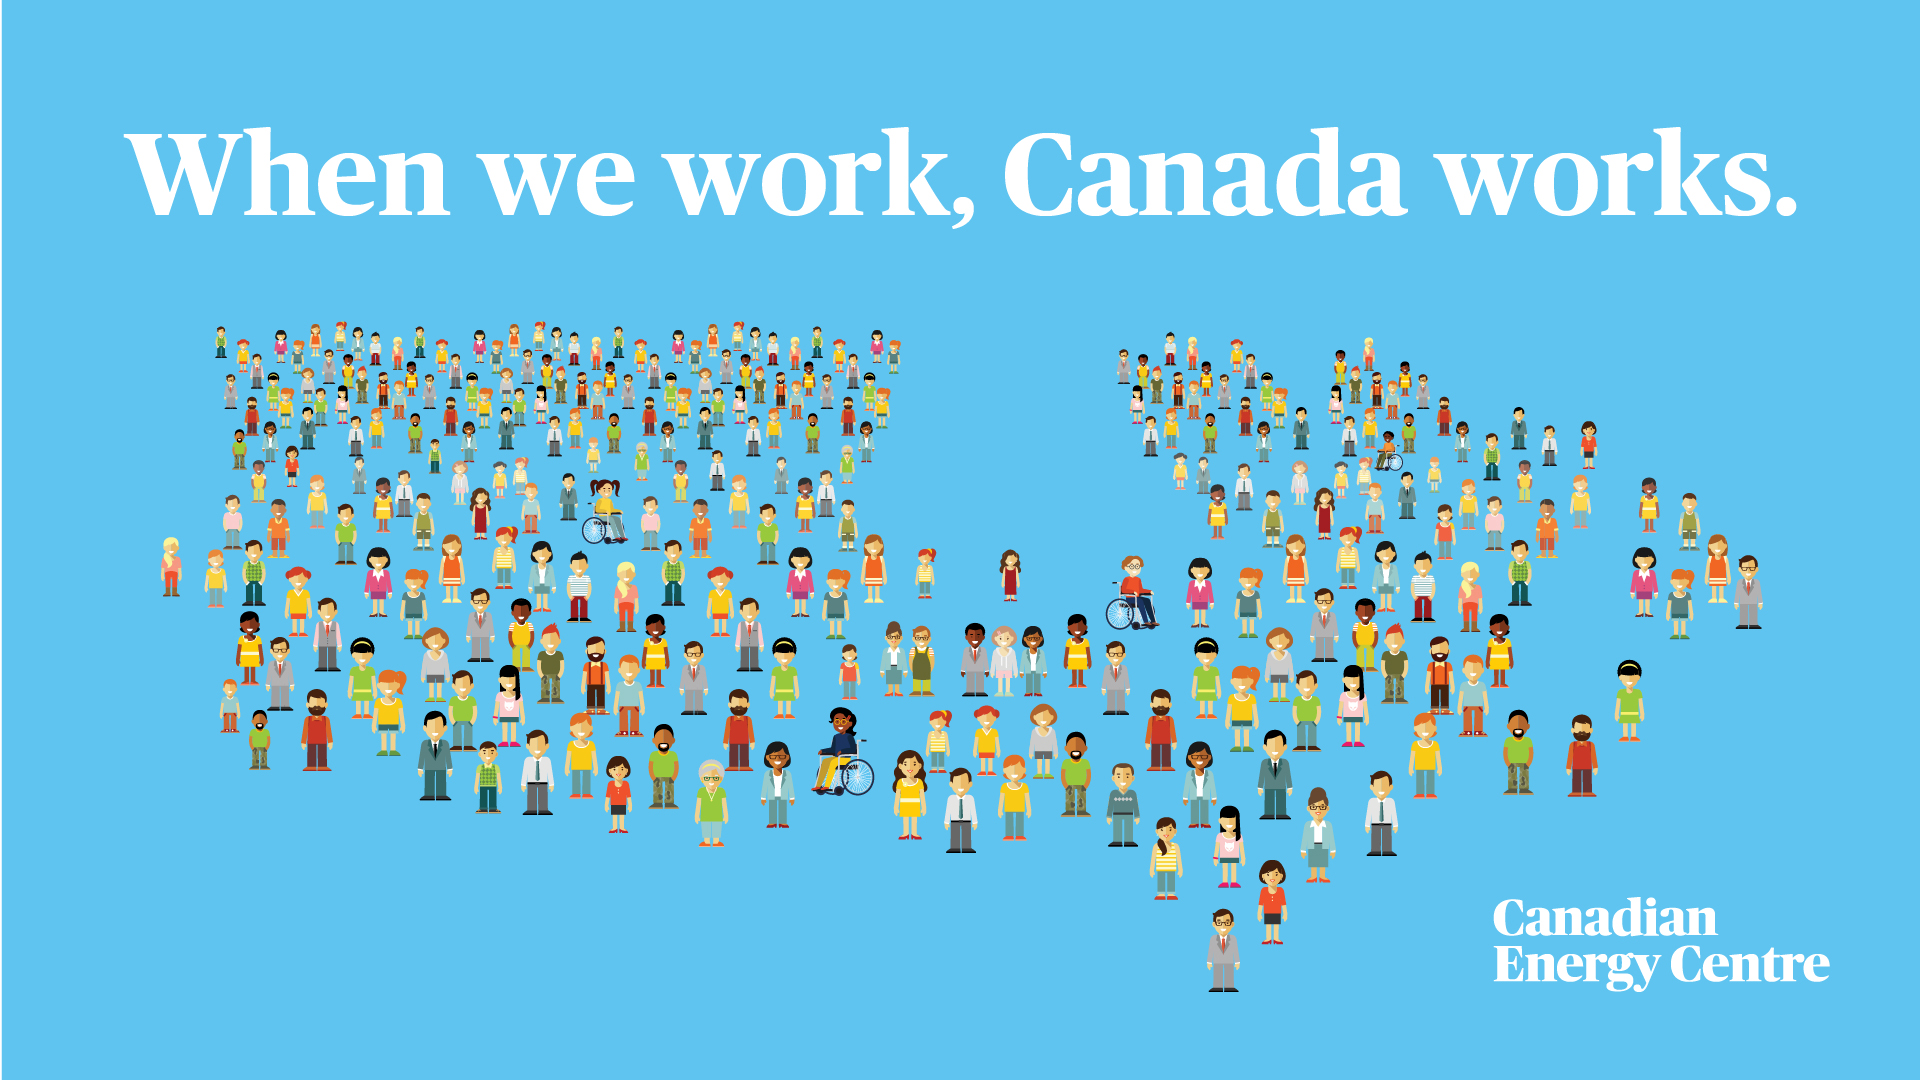 Campaign banner - 'When we work, Canada works.' Credit: Canadian Energy Centre